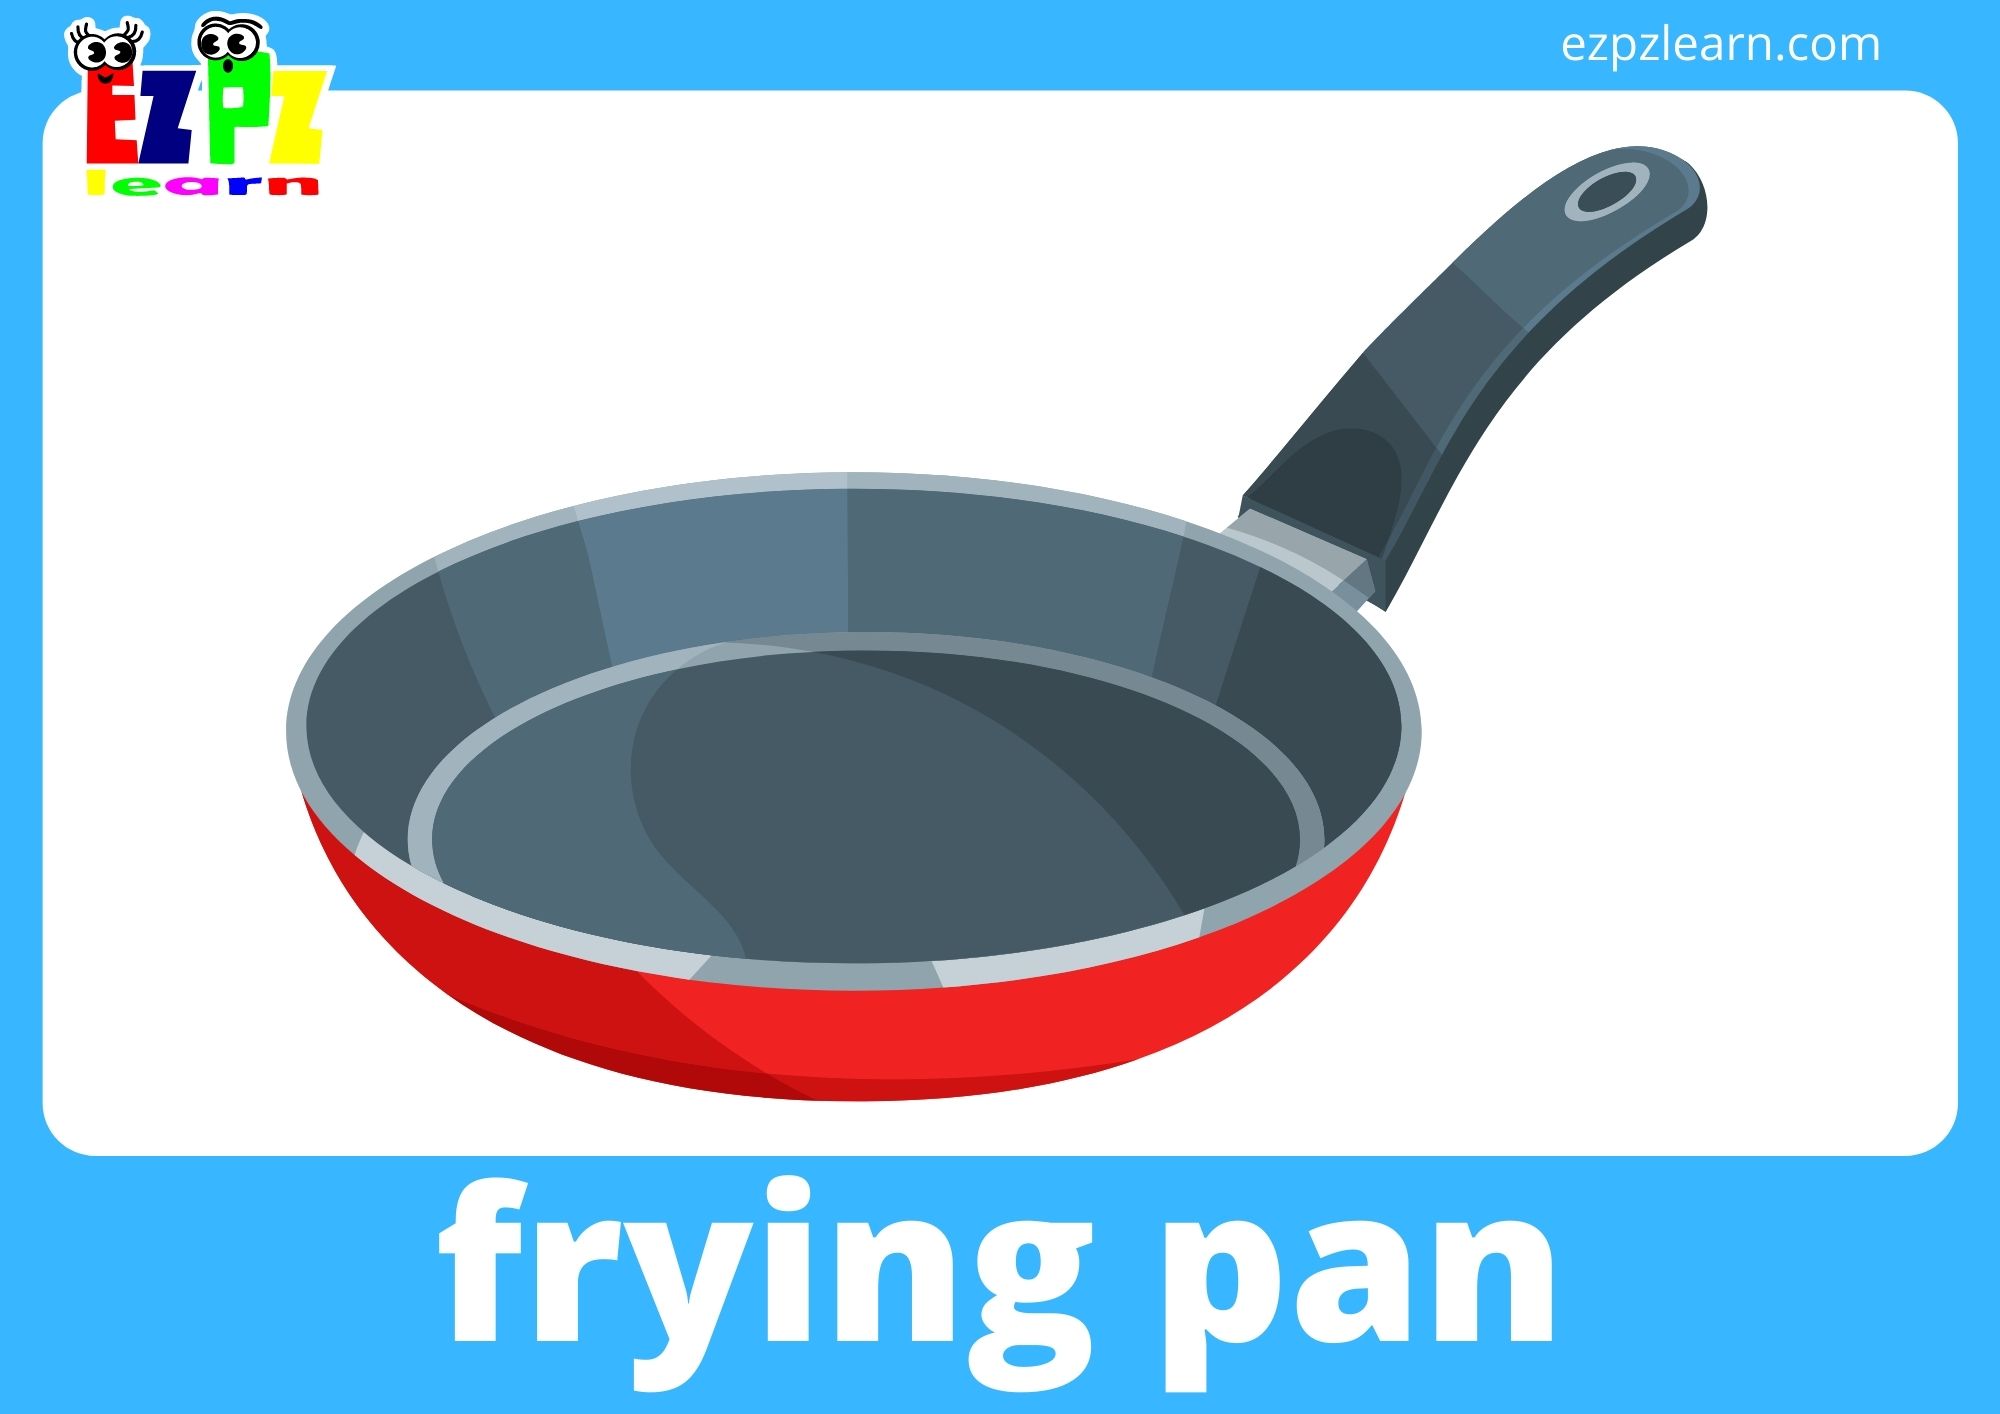 Kitchen Items and Cooking Tools Vocabulary Flashcards, Picture